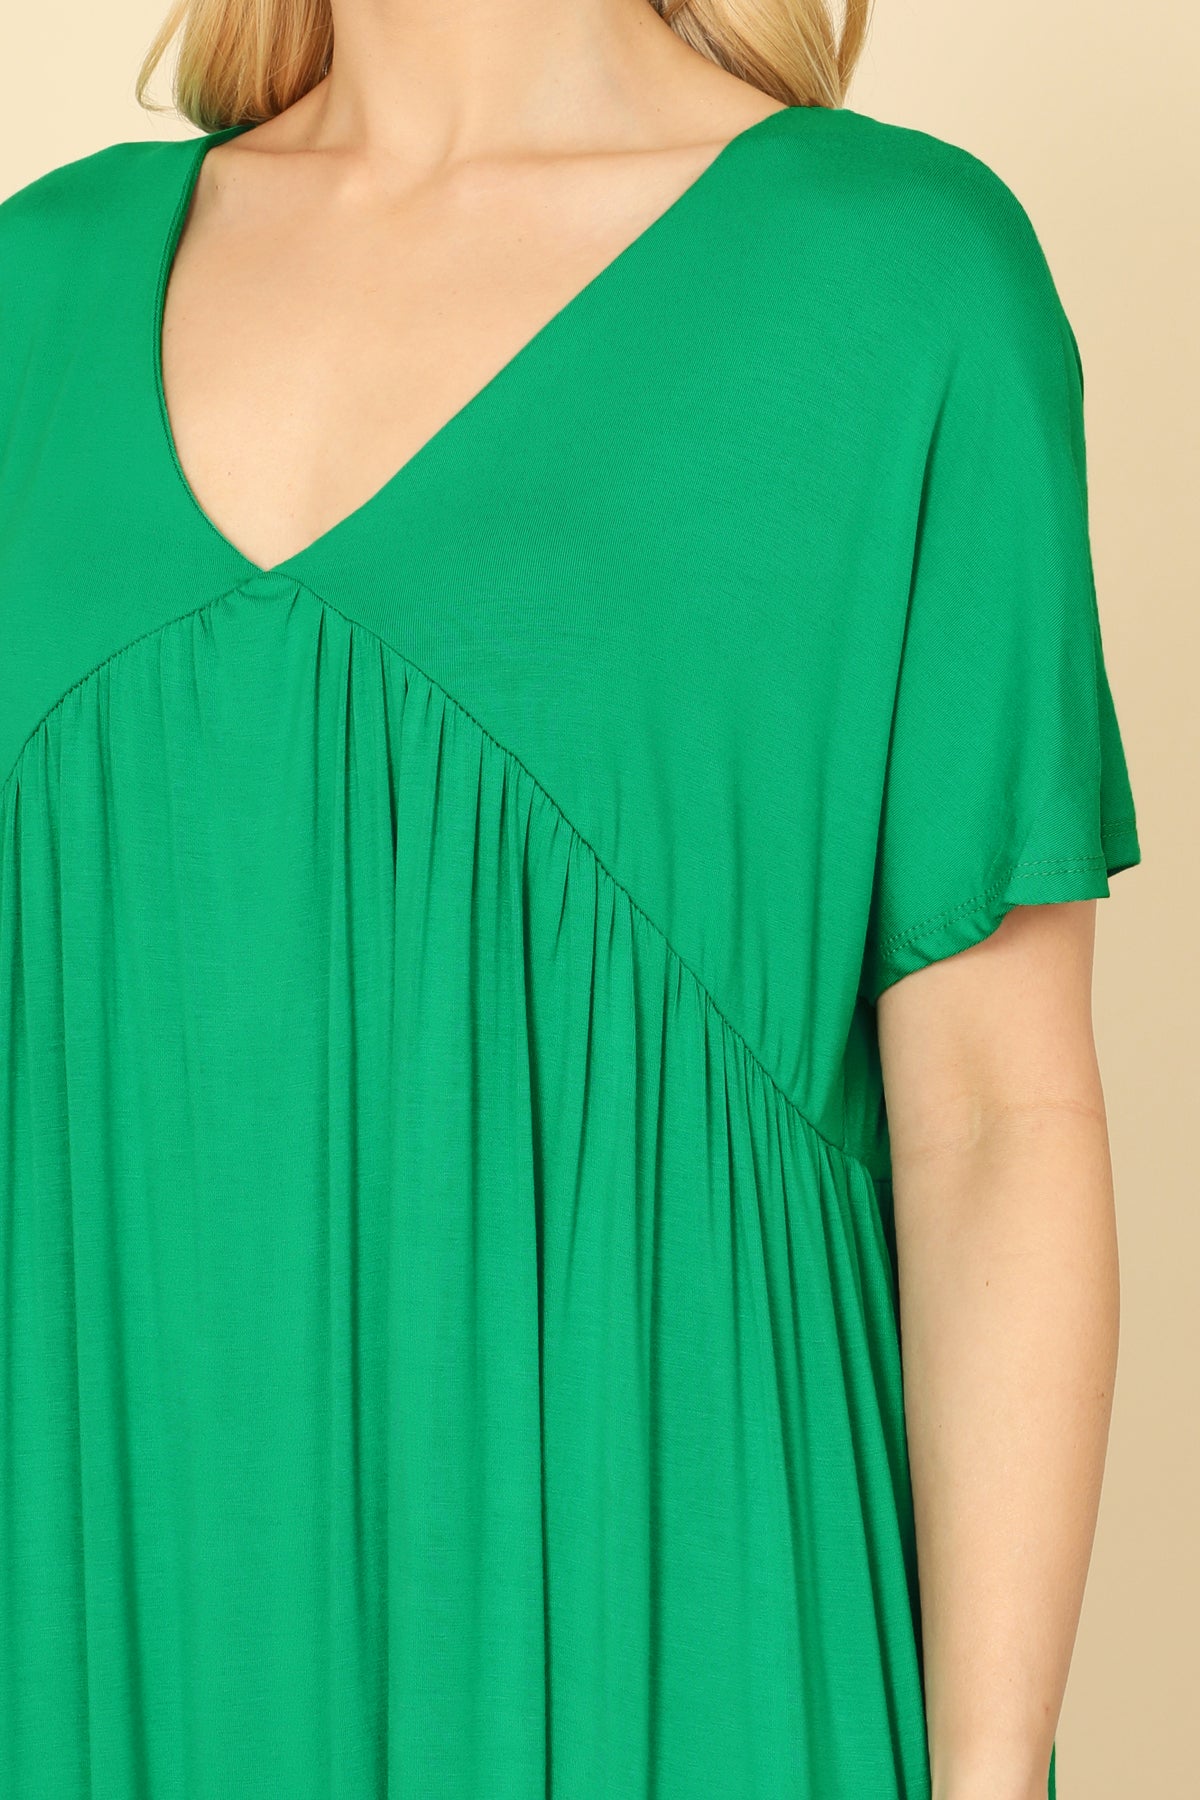 V-NECK SHORT SLEEVE PLEATED DETAIL SOLID MAXI DRESS 2-2-2-2